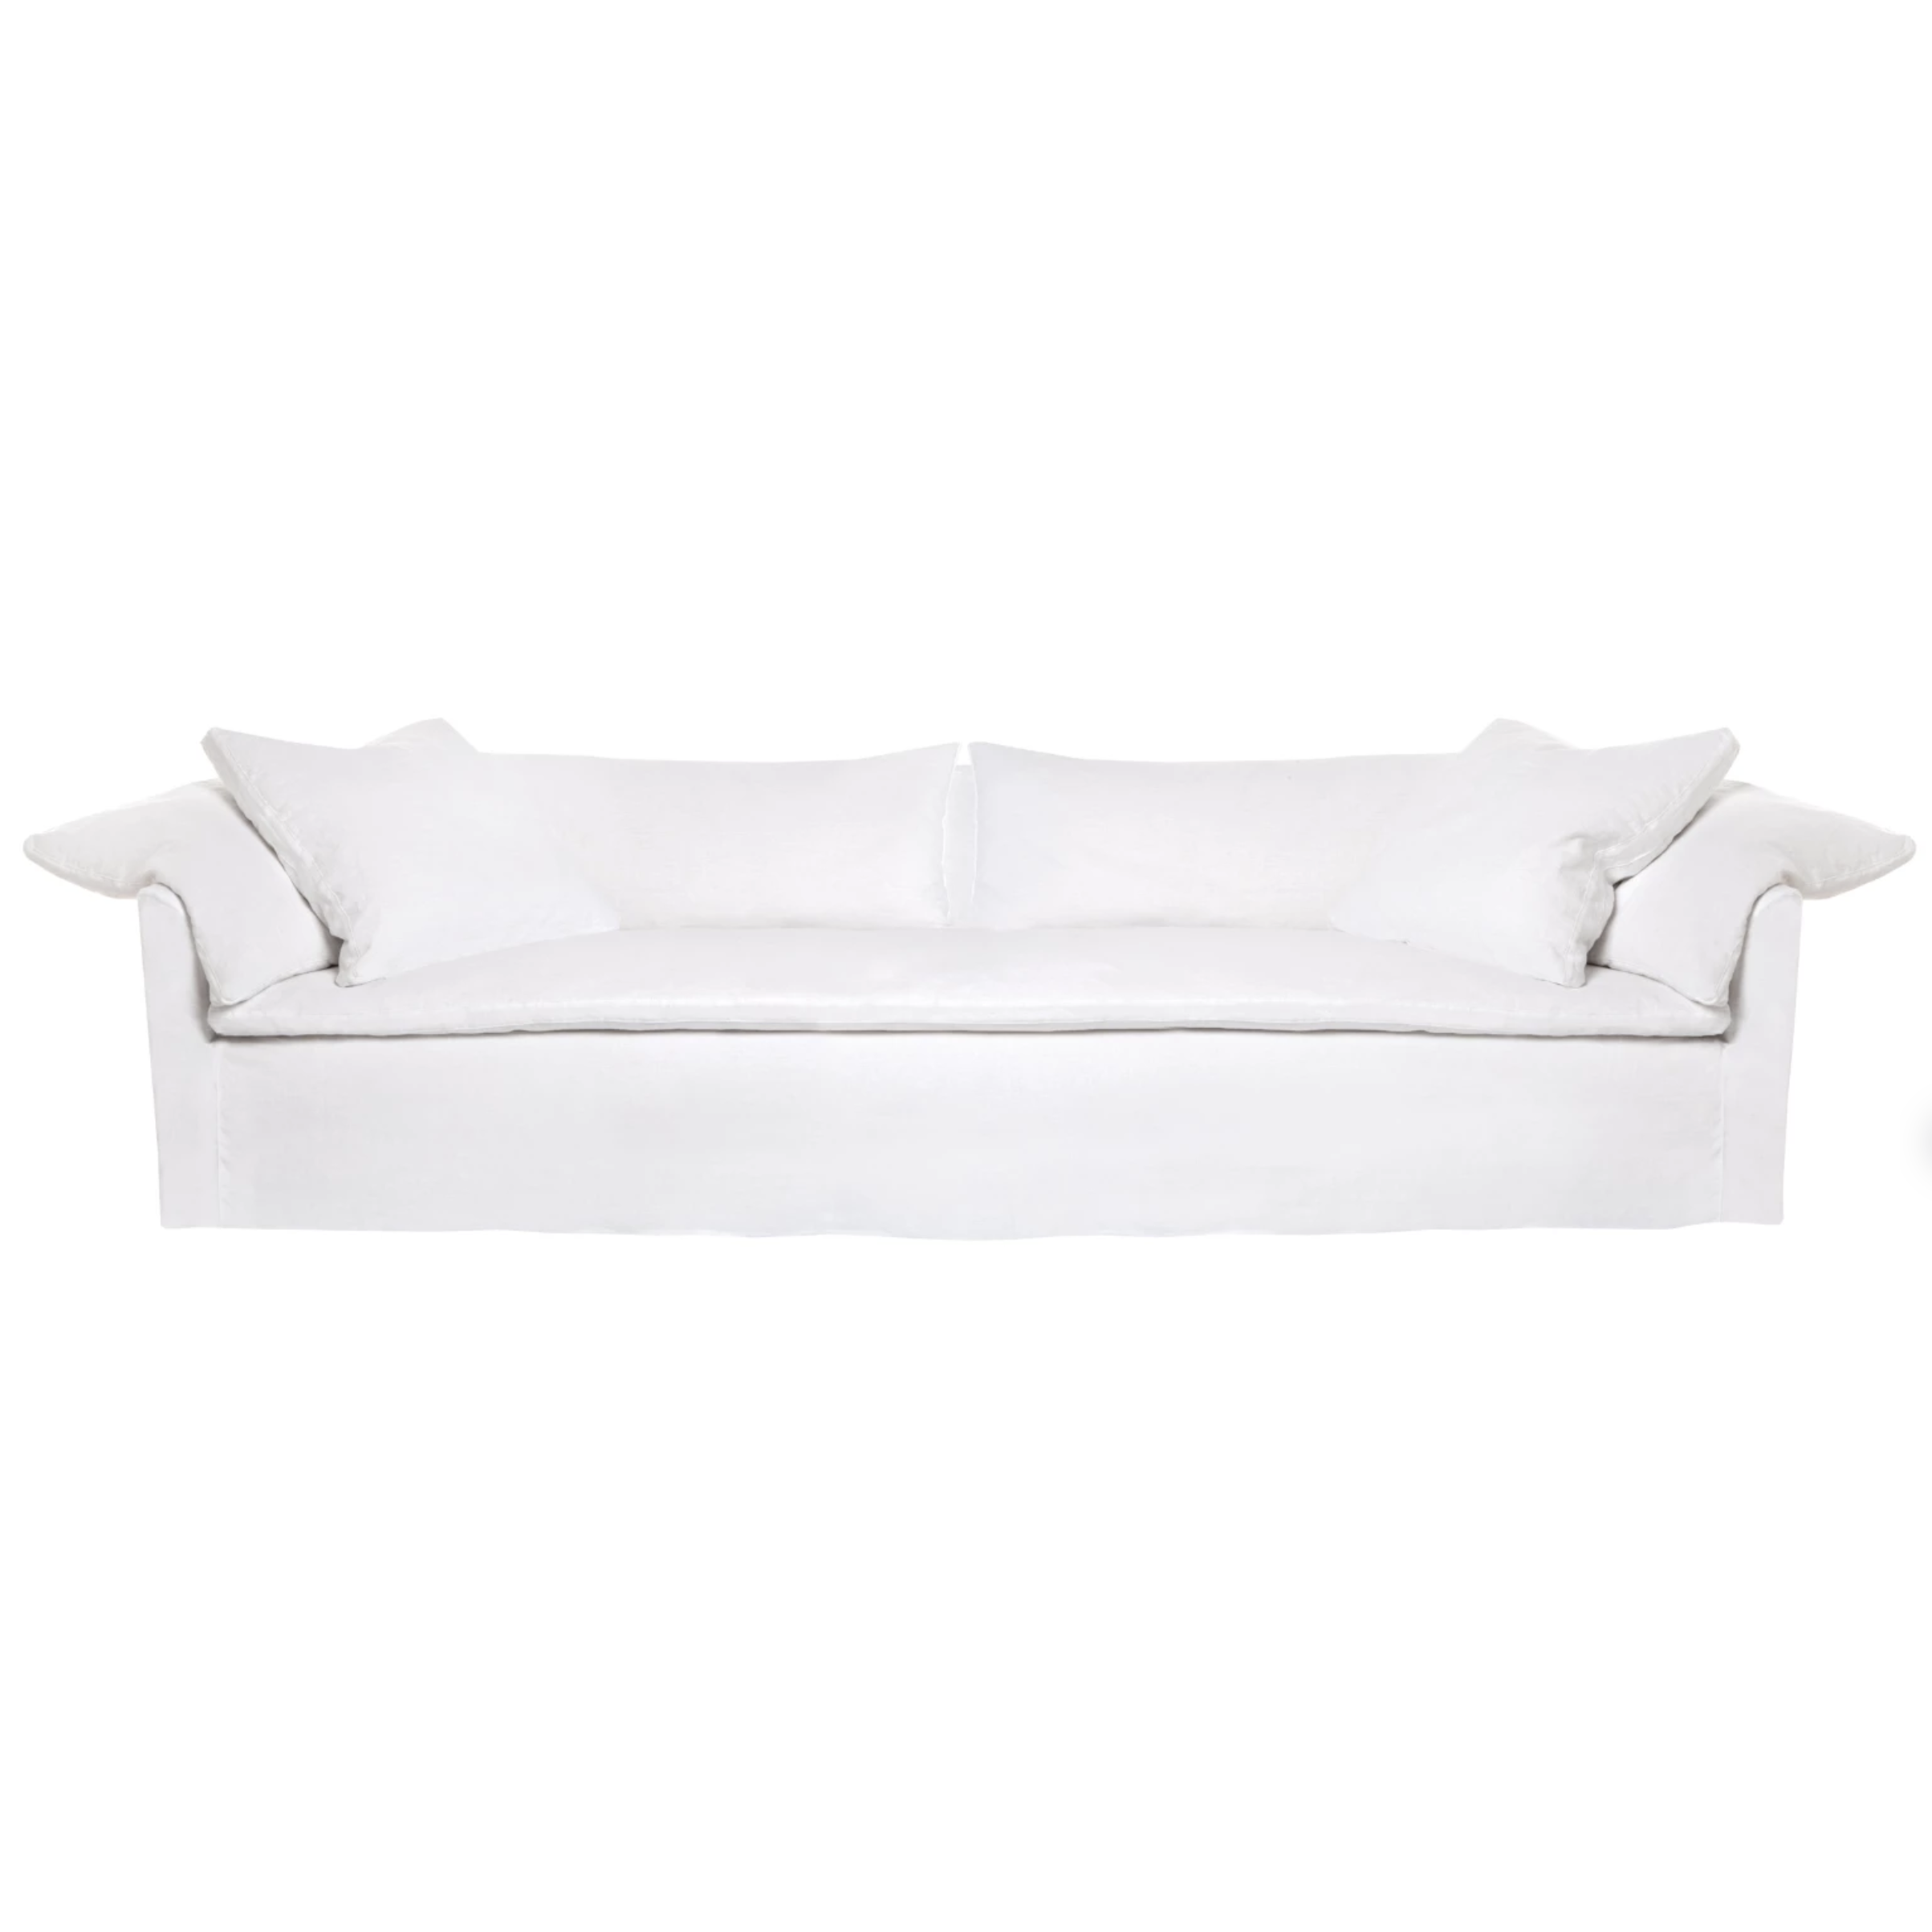 This cozy Donato Sofa from Cisco Brothers is our favorite!  As shown slipcovered in Mariet White 100% linen fabric.  97"w x 32"h x 41"d Seat Space: 85"w x 24"d x 16"h